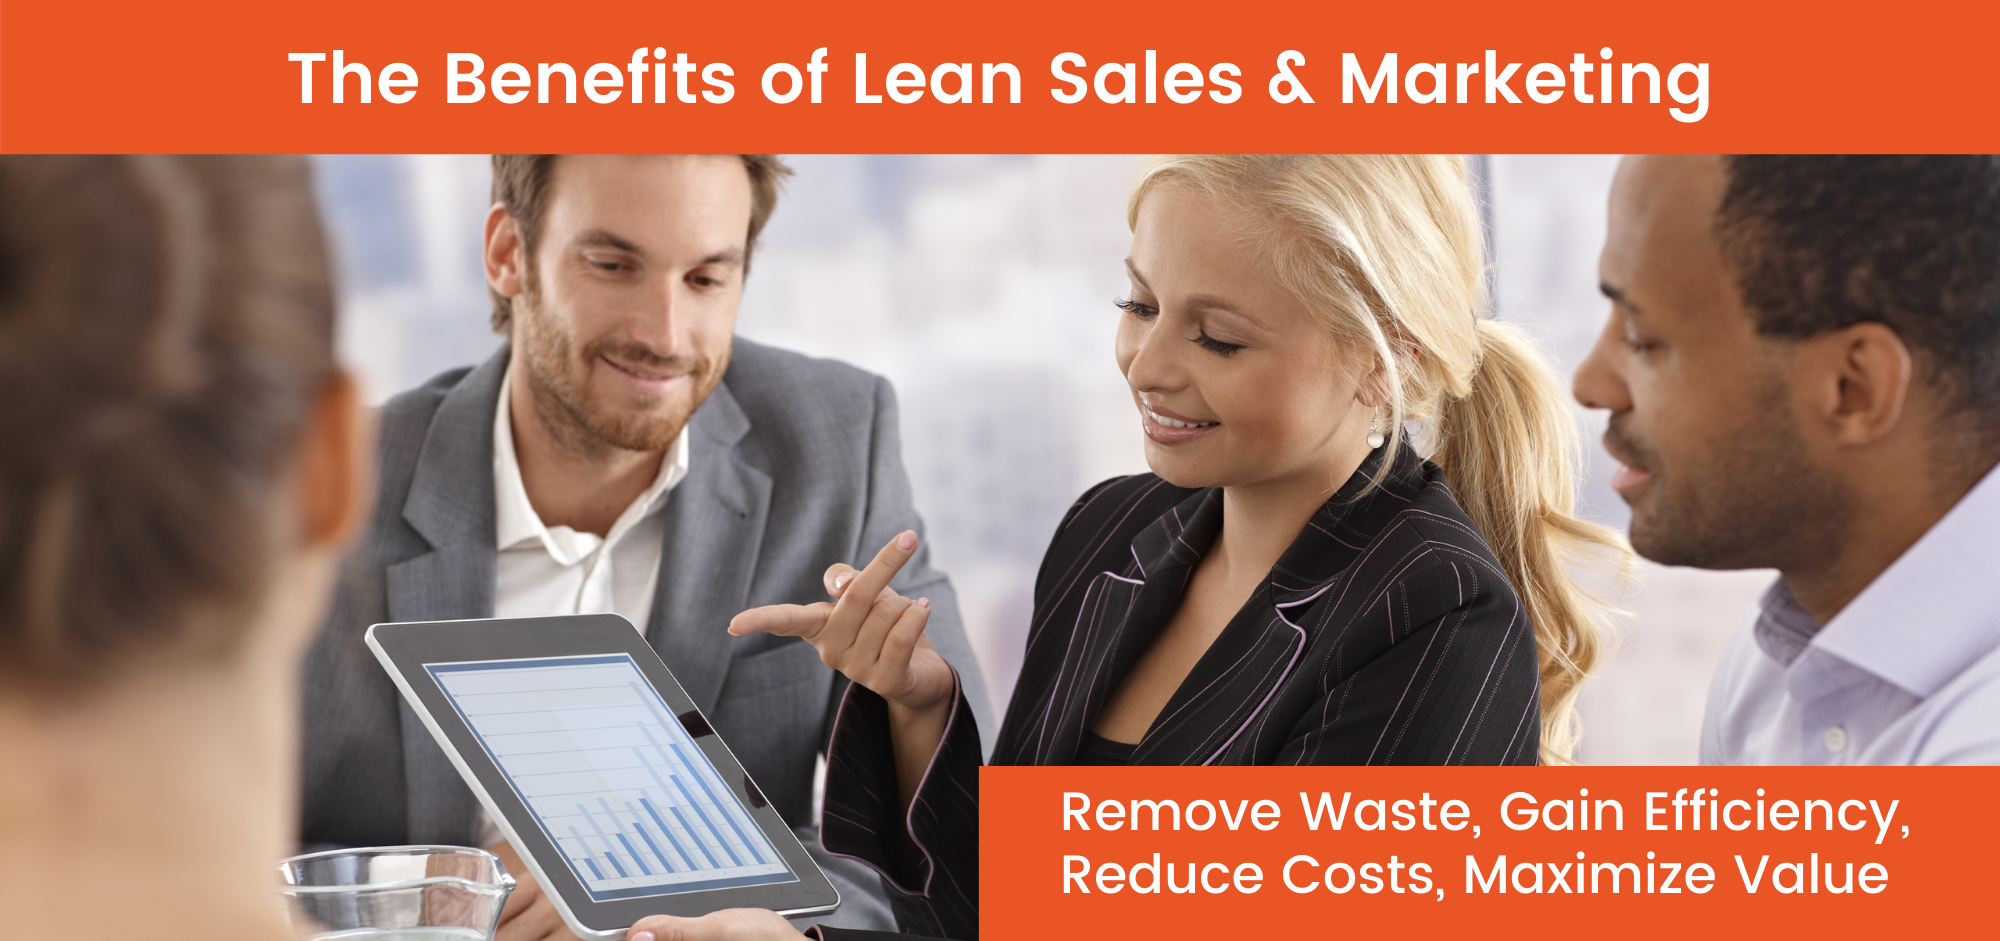 The Benefits of Lean Sales and Marketing